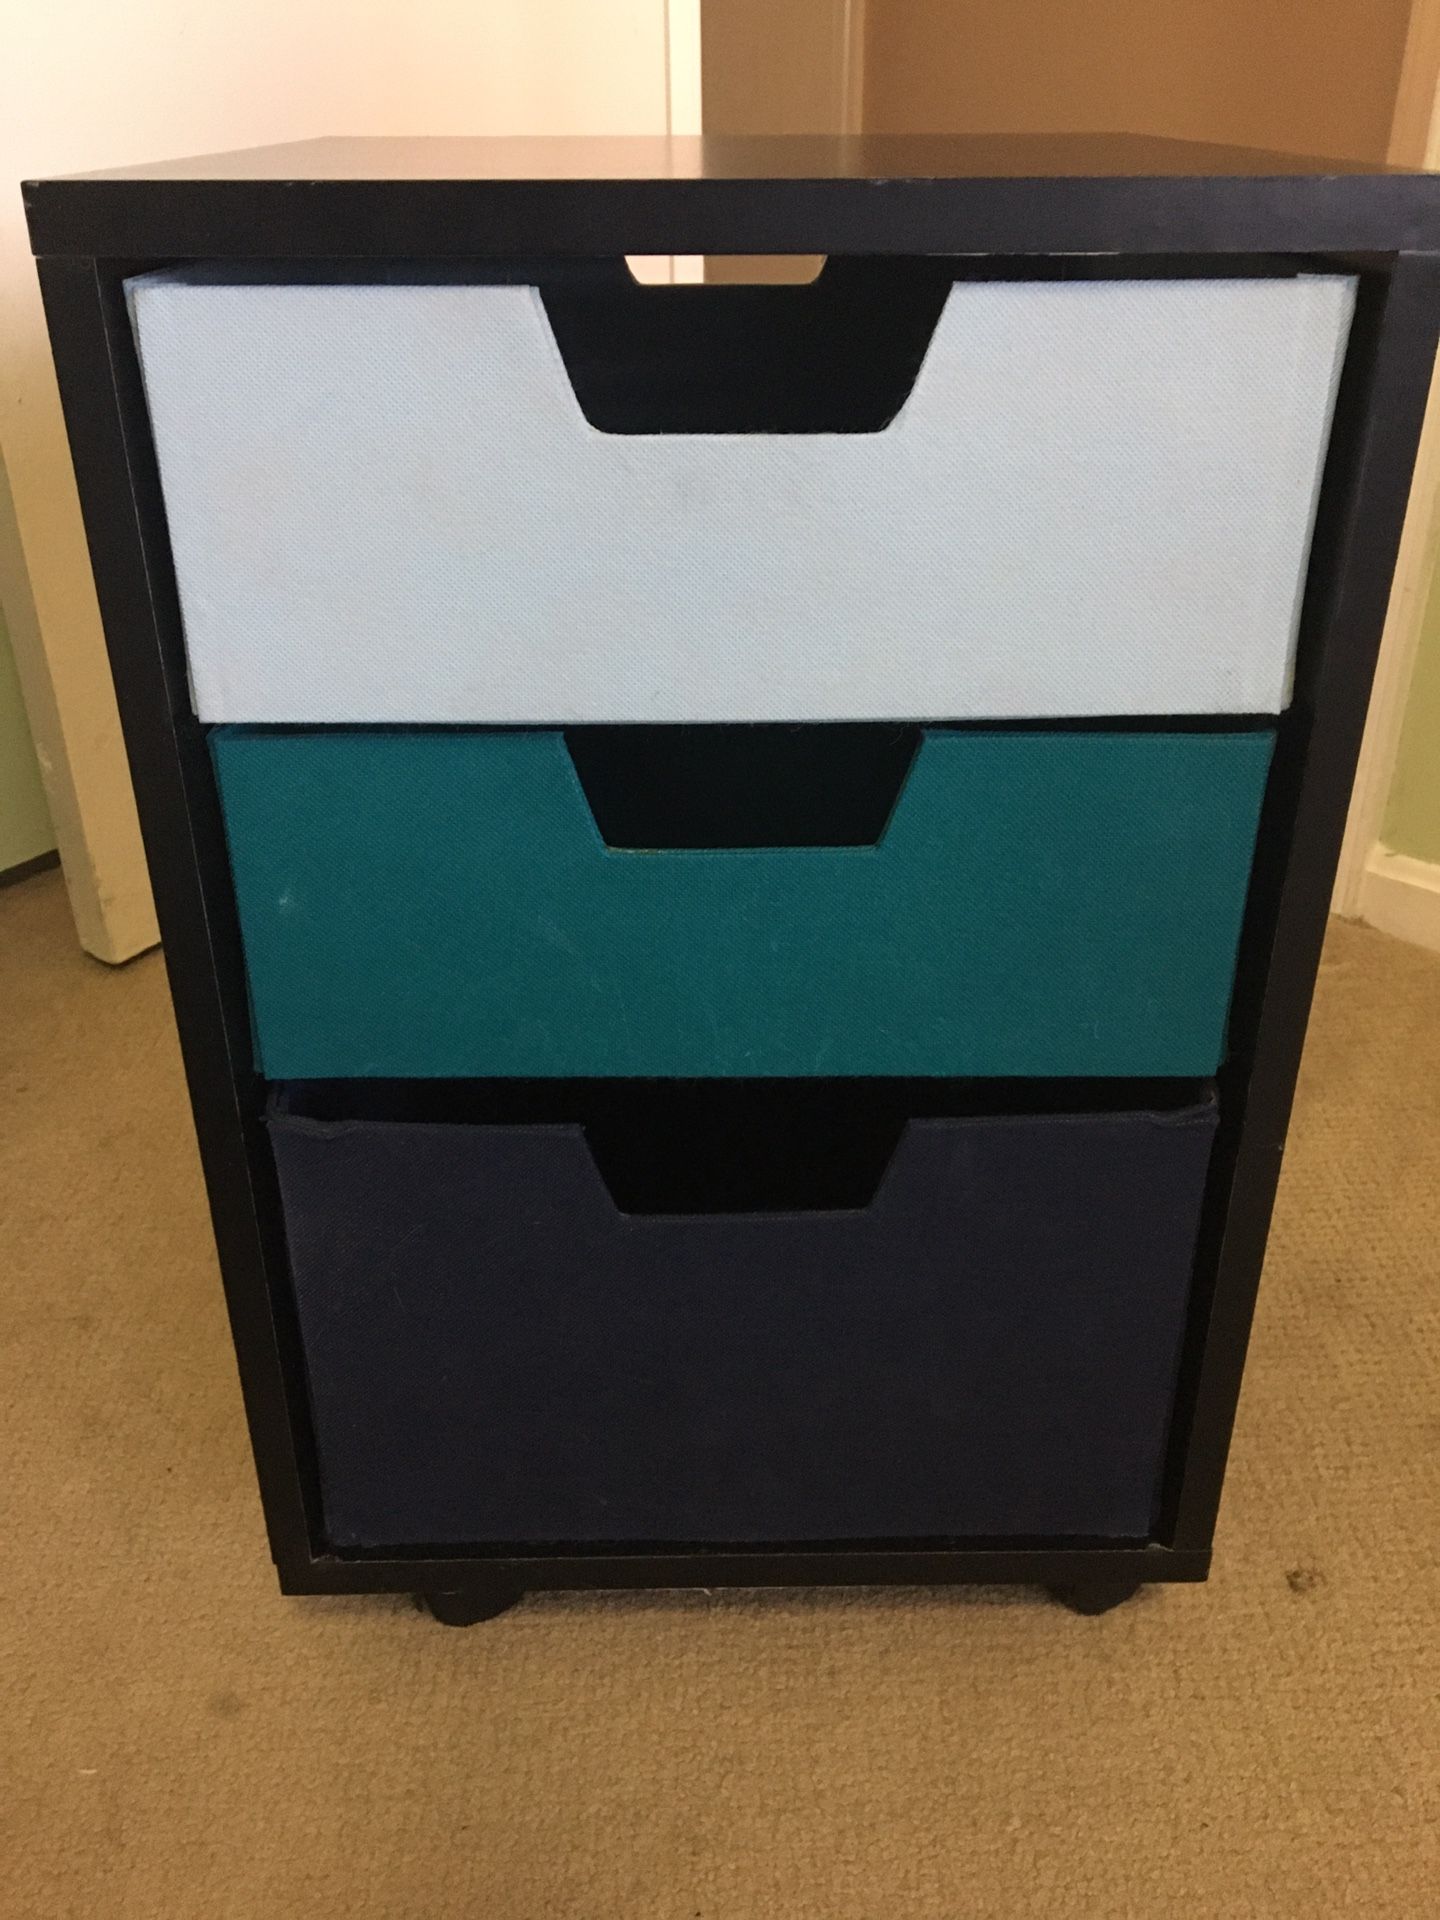 Rolling black wood storage cart or night stand, 3 cloth colored drawers / bins - great for storing crafts or anything